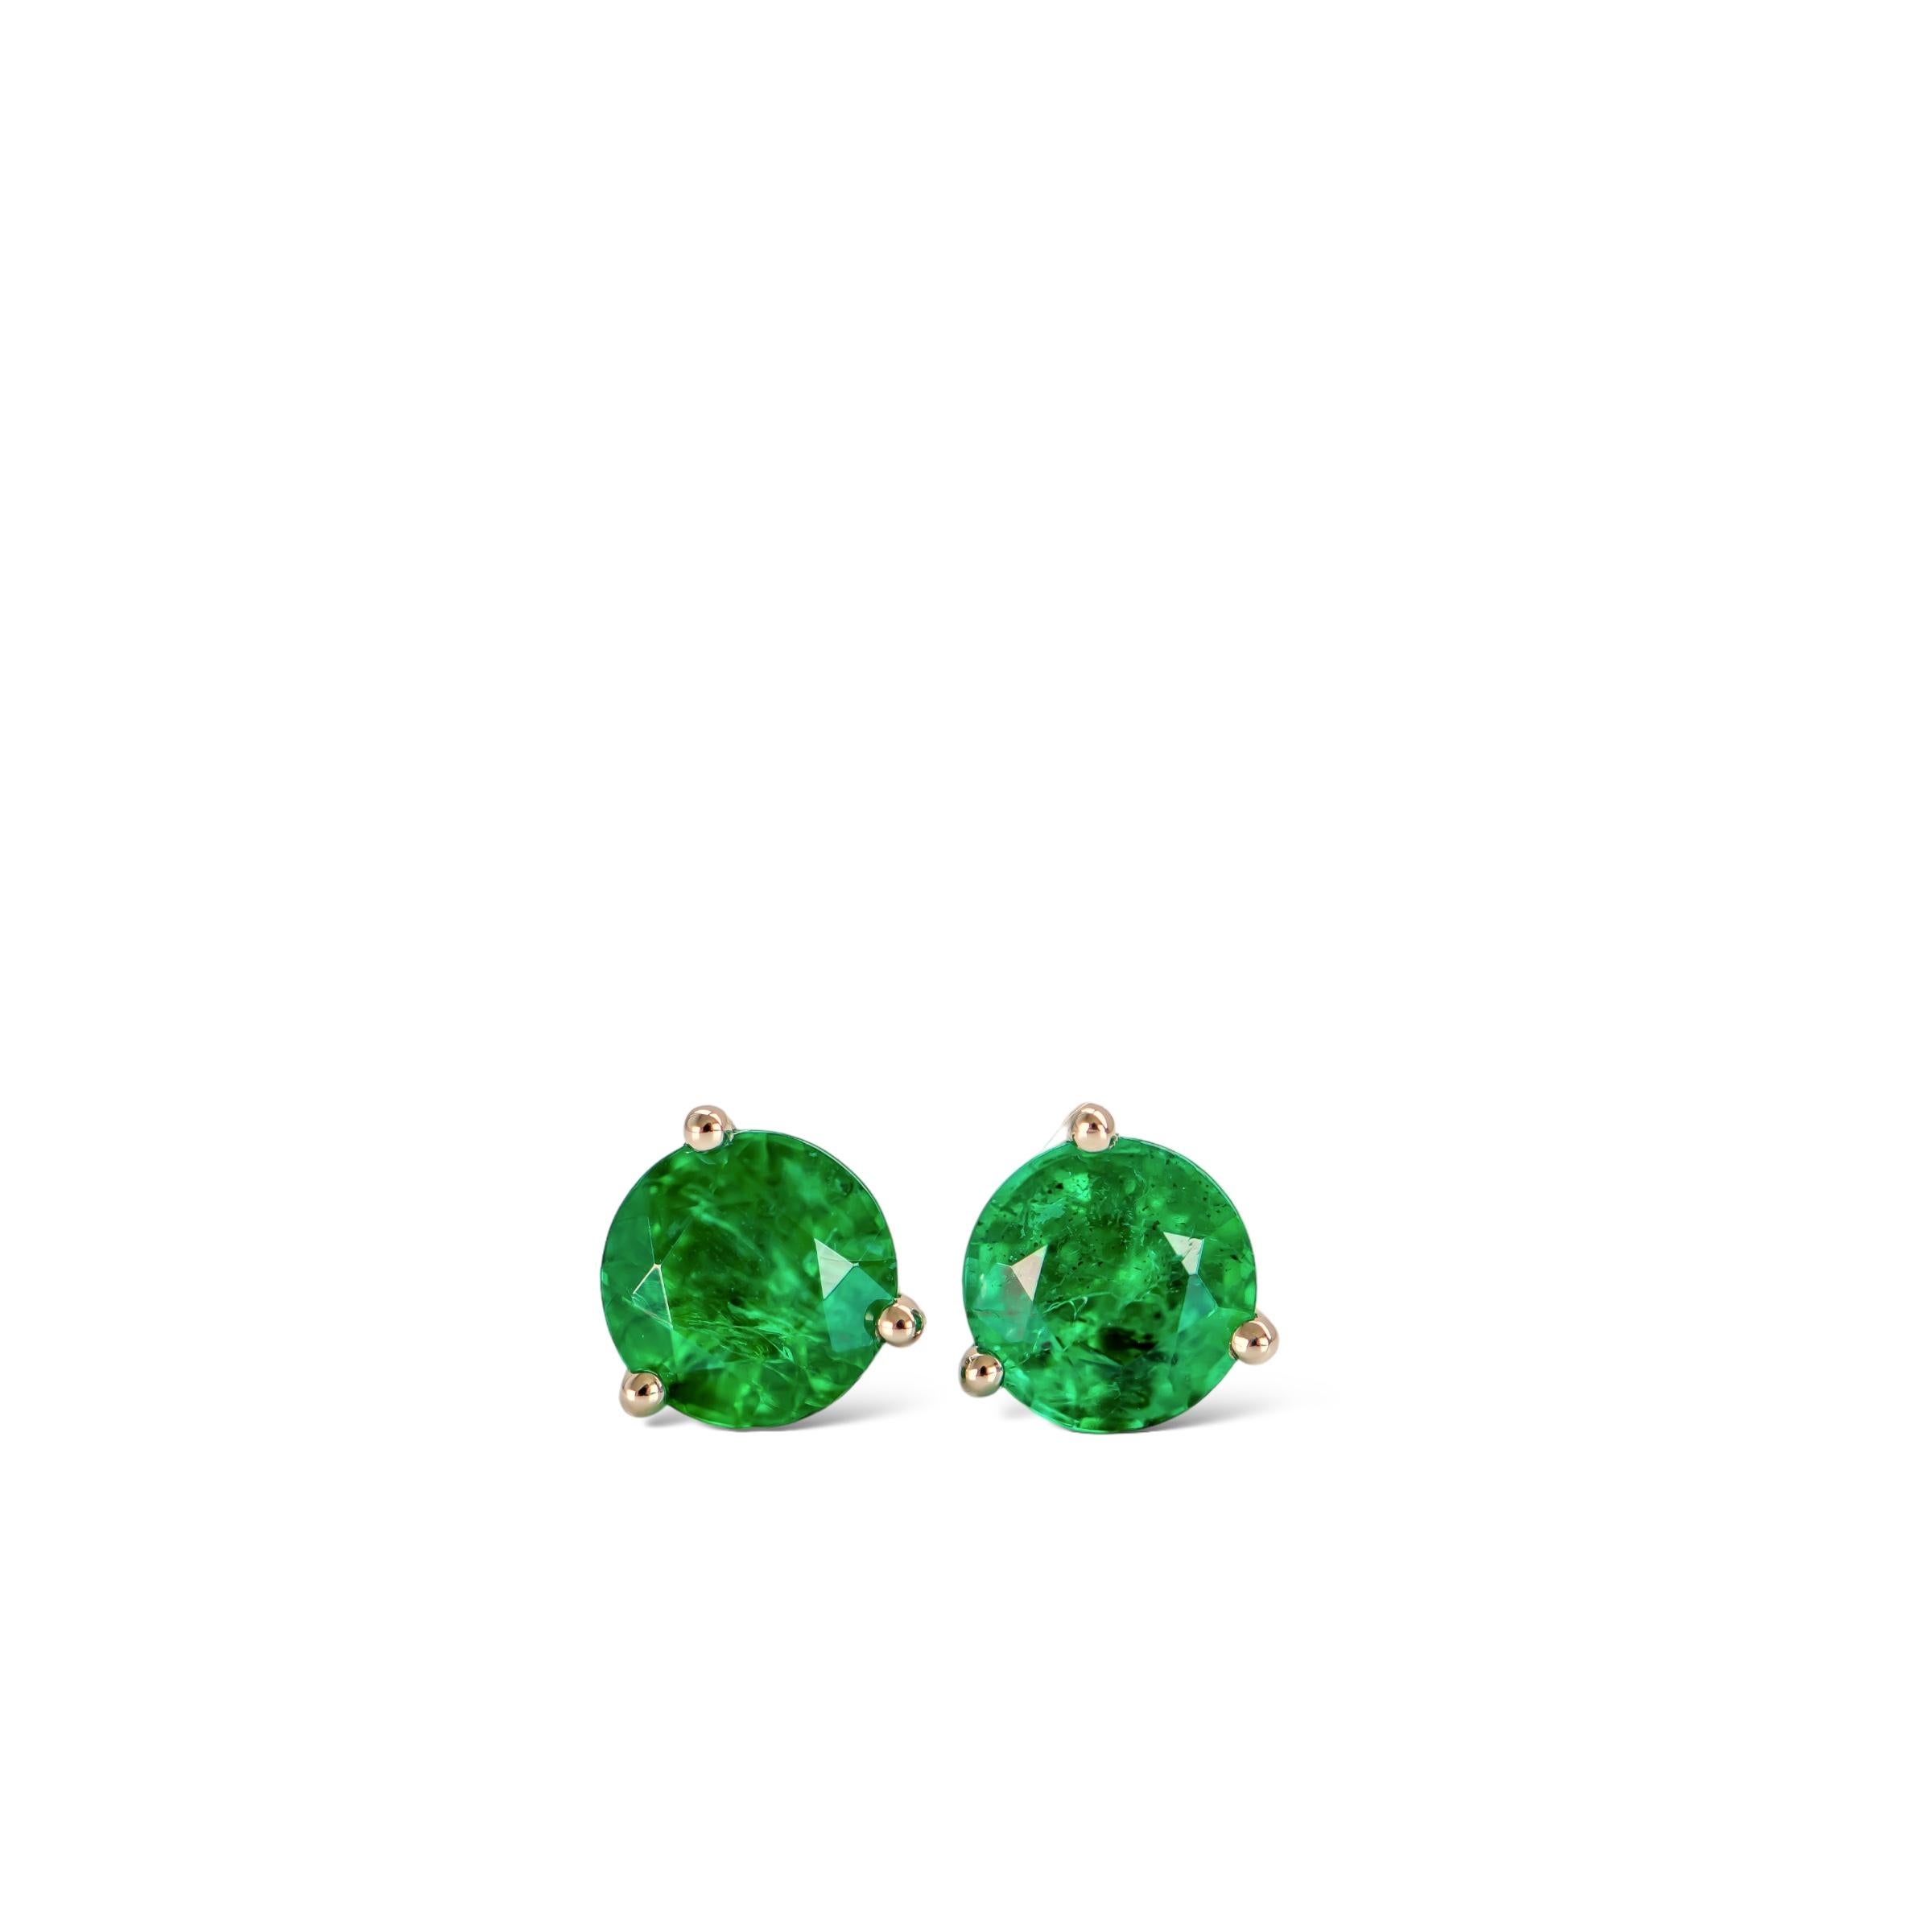 Stunning 0.67ct natural round green emerald studs set in luxurious platinum.

These beautiful perfectly matched emeralds are from Zambia and measure 4.5mm each. 

The emerald colour is a medium-dark vivid green. The studs are set in a three-prong